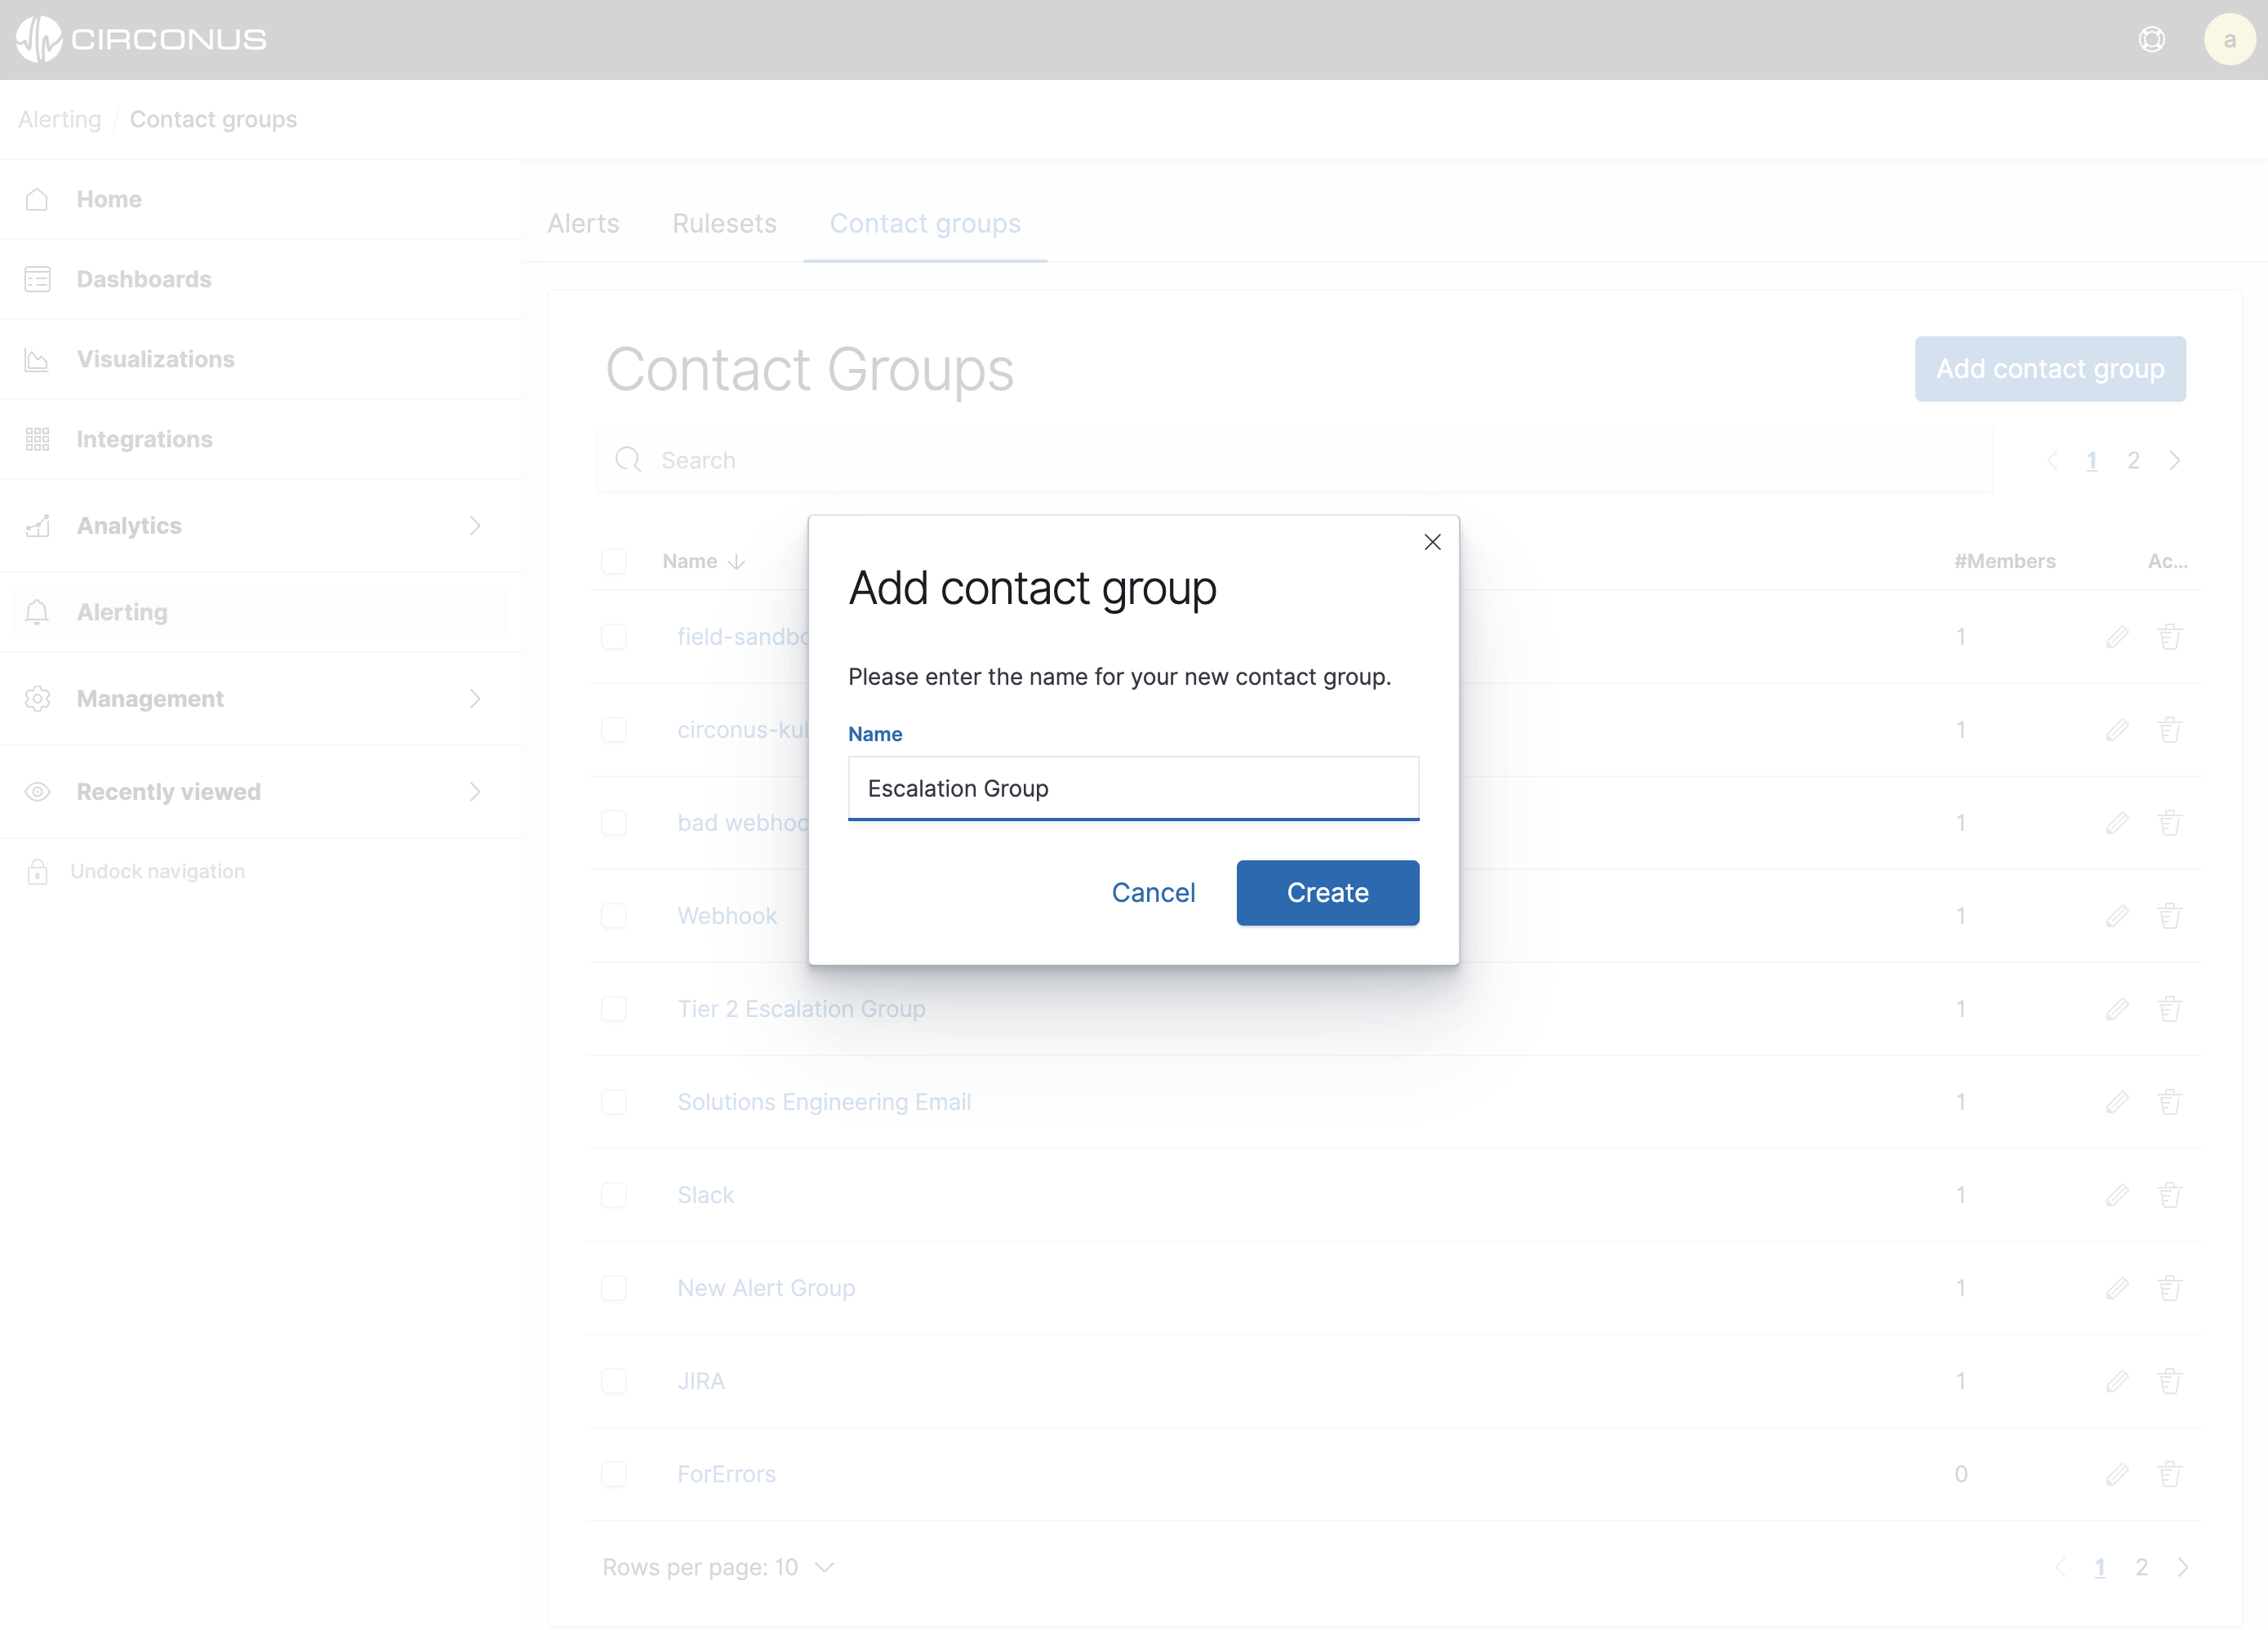 Add a Contact Group